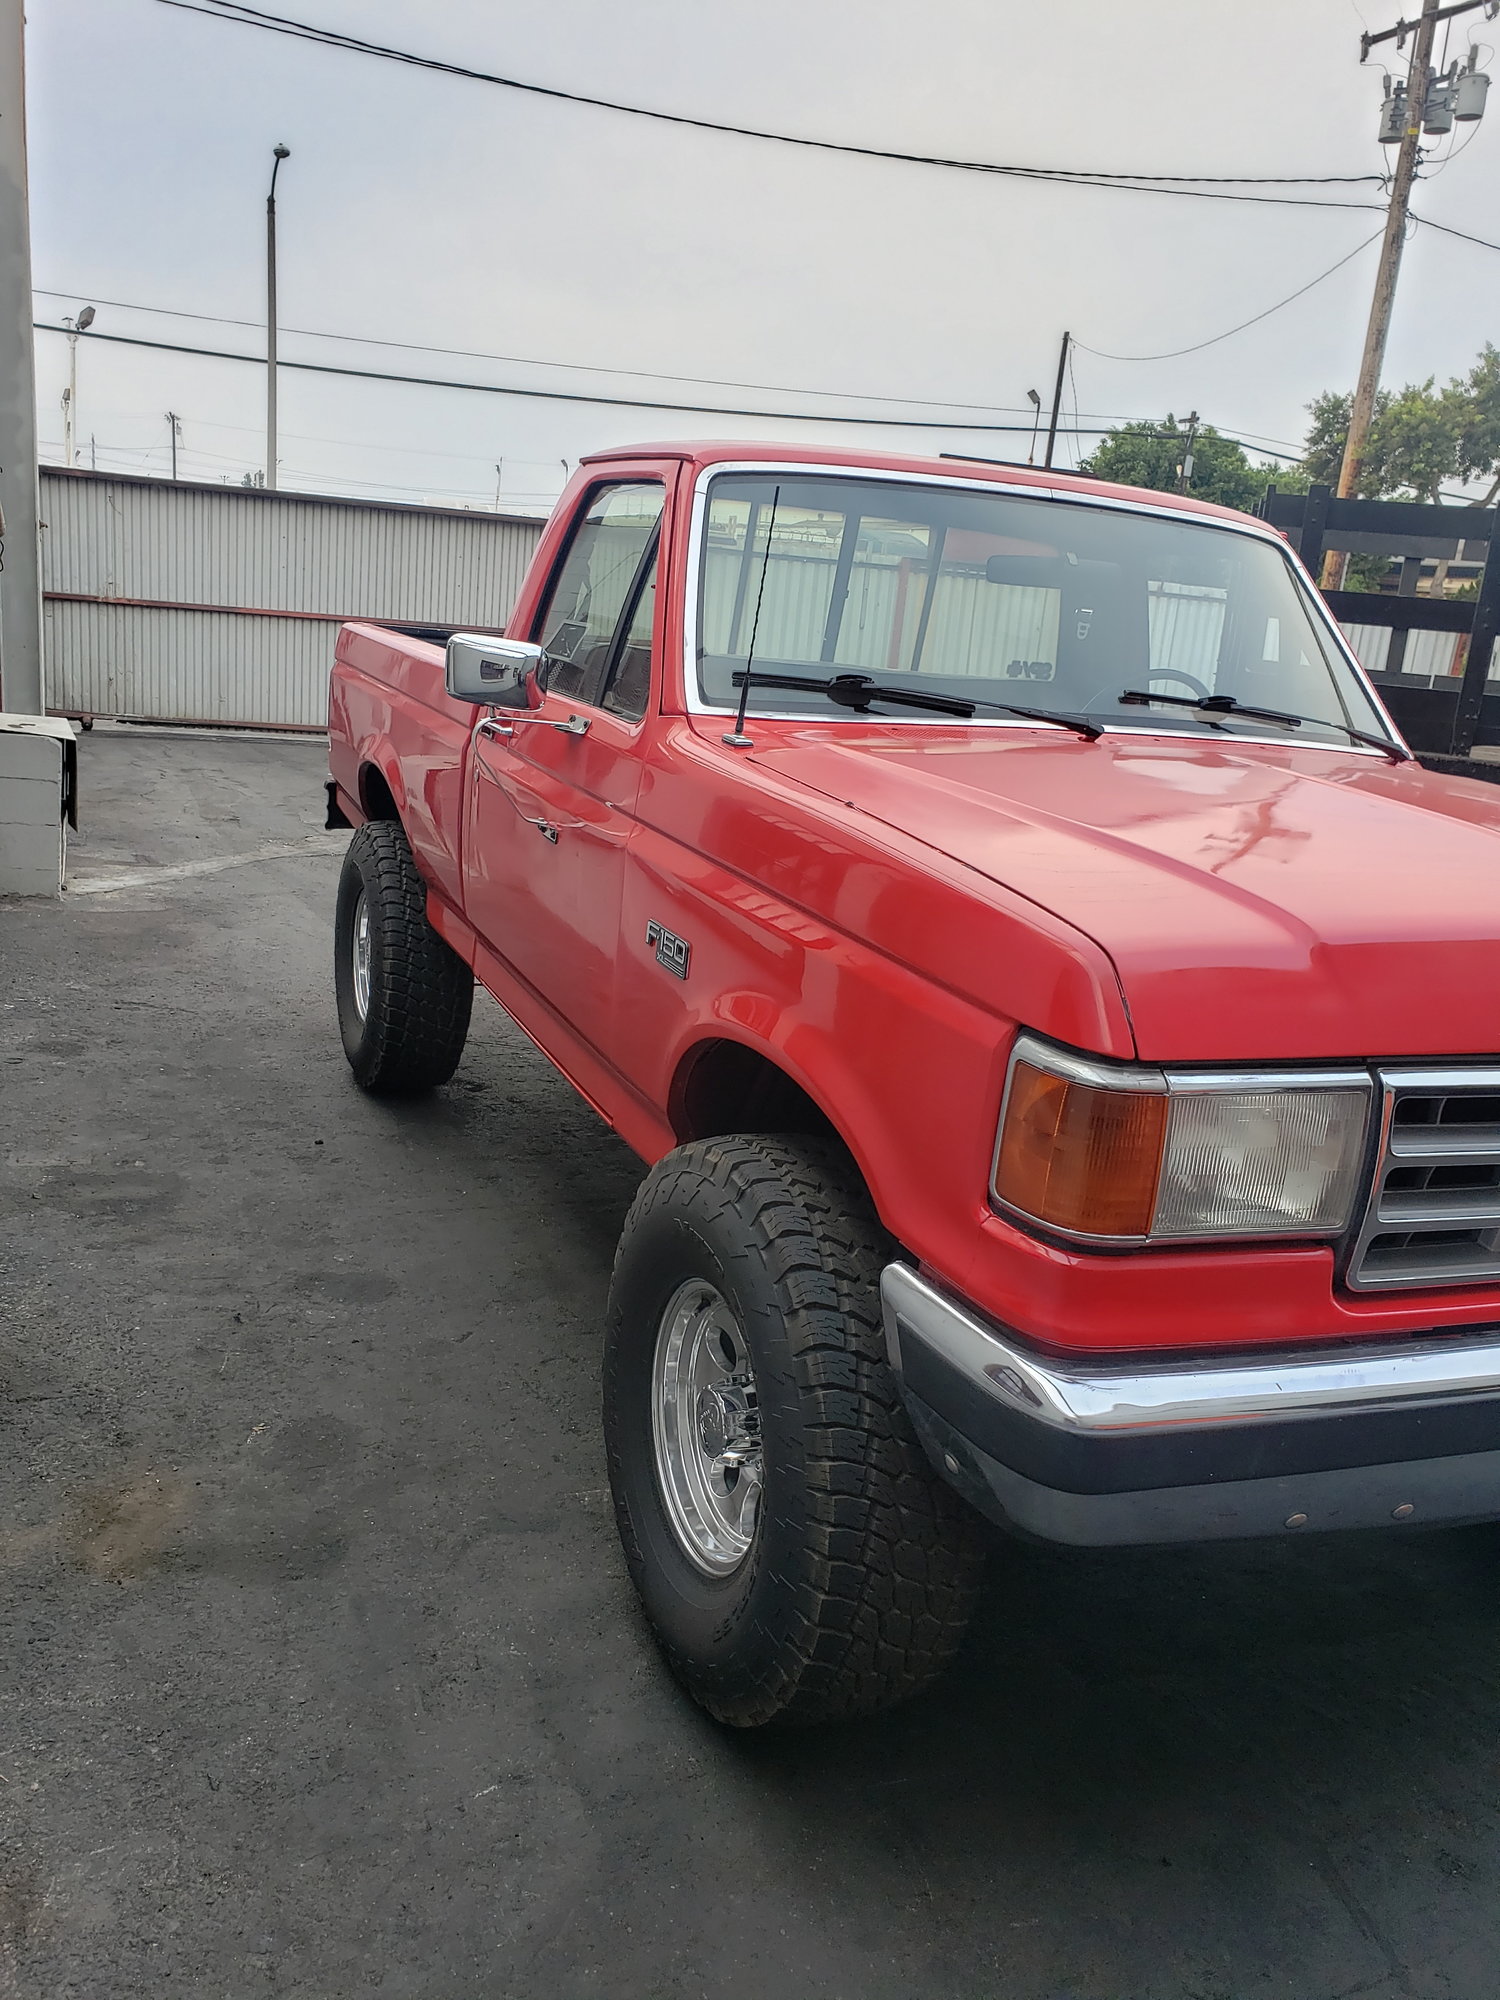 1987 Ford F-150 - 87 F150 2WD 5 speed manual - Used - VIN 1FTDF15YOHPB40265 - 320,000 Miles - 6 cyl - 2WD - Manual - Truck - Red - Long Beach, CA 90813, United States